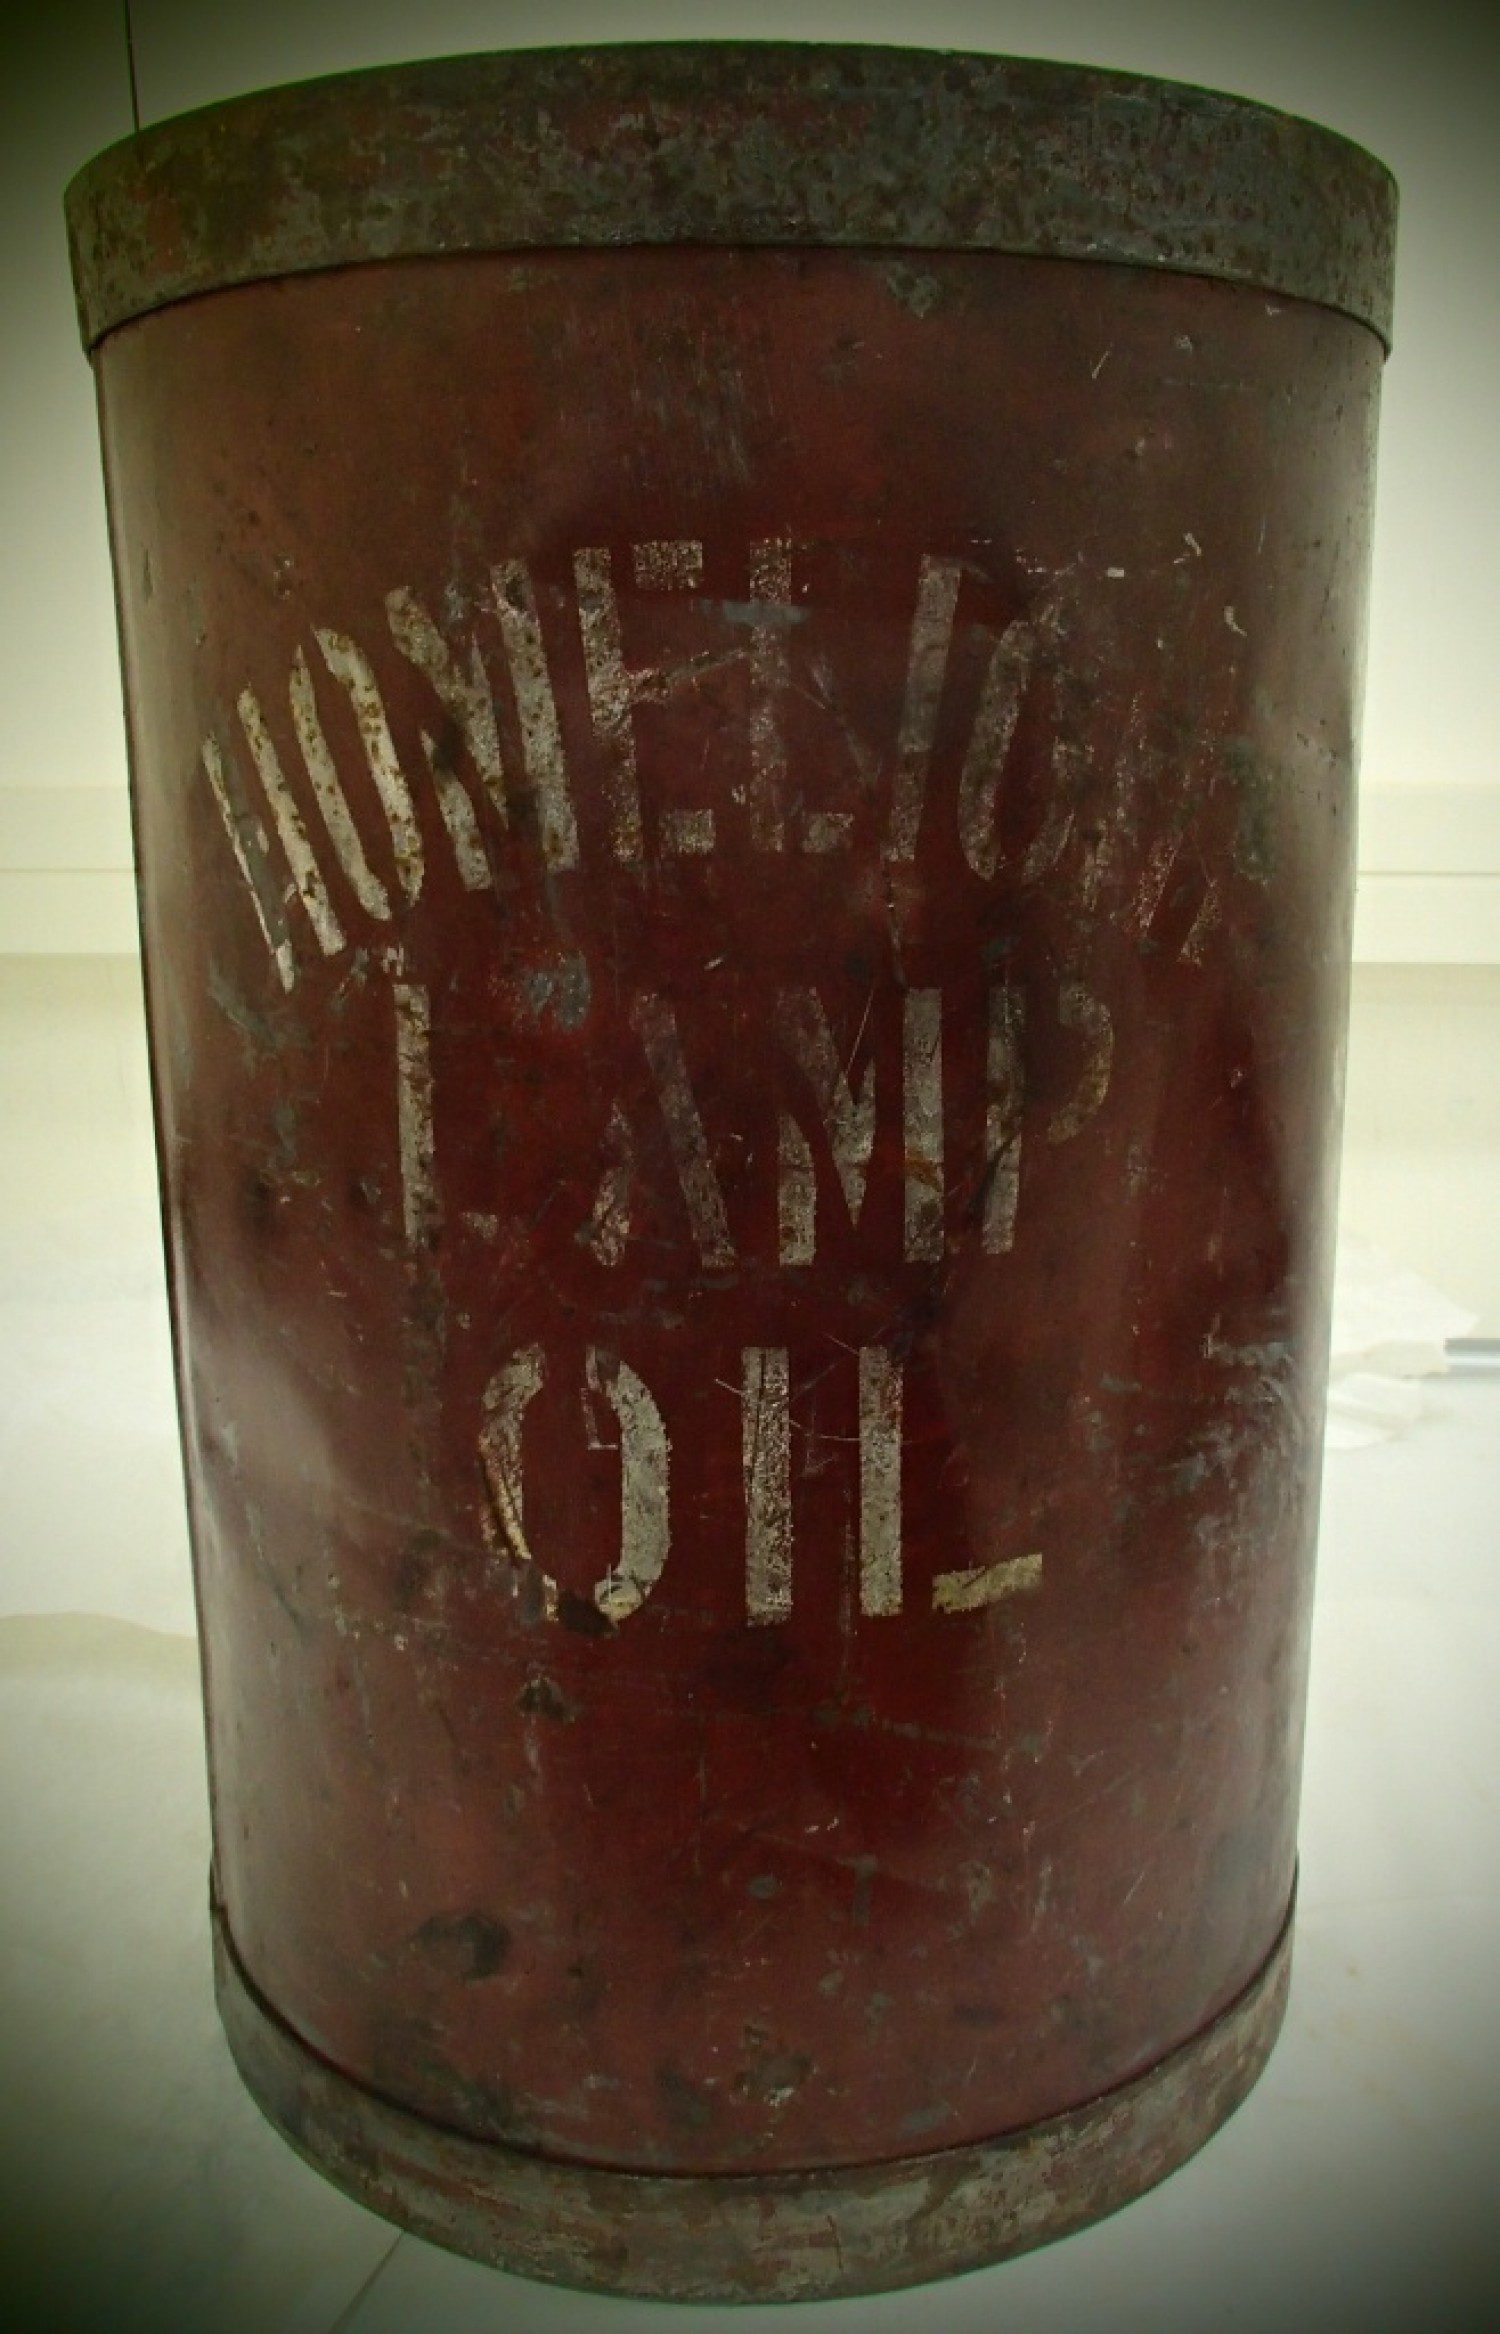 Homelight lamp oil can